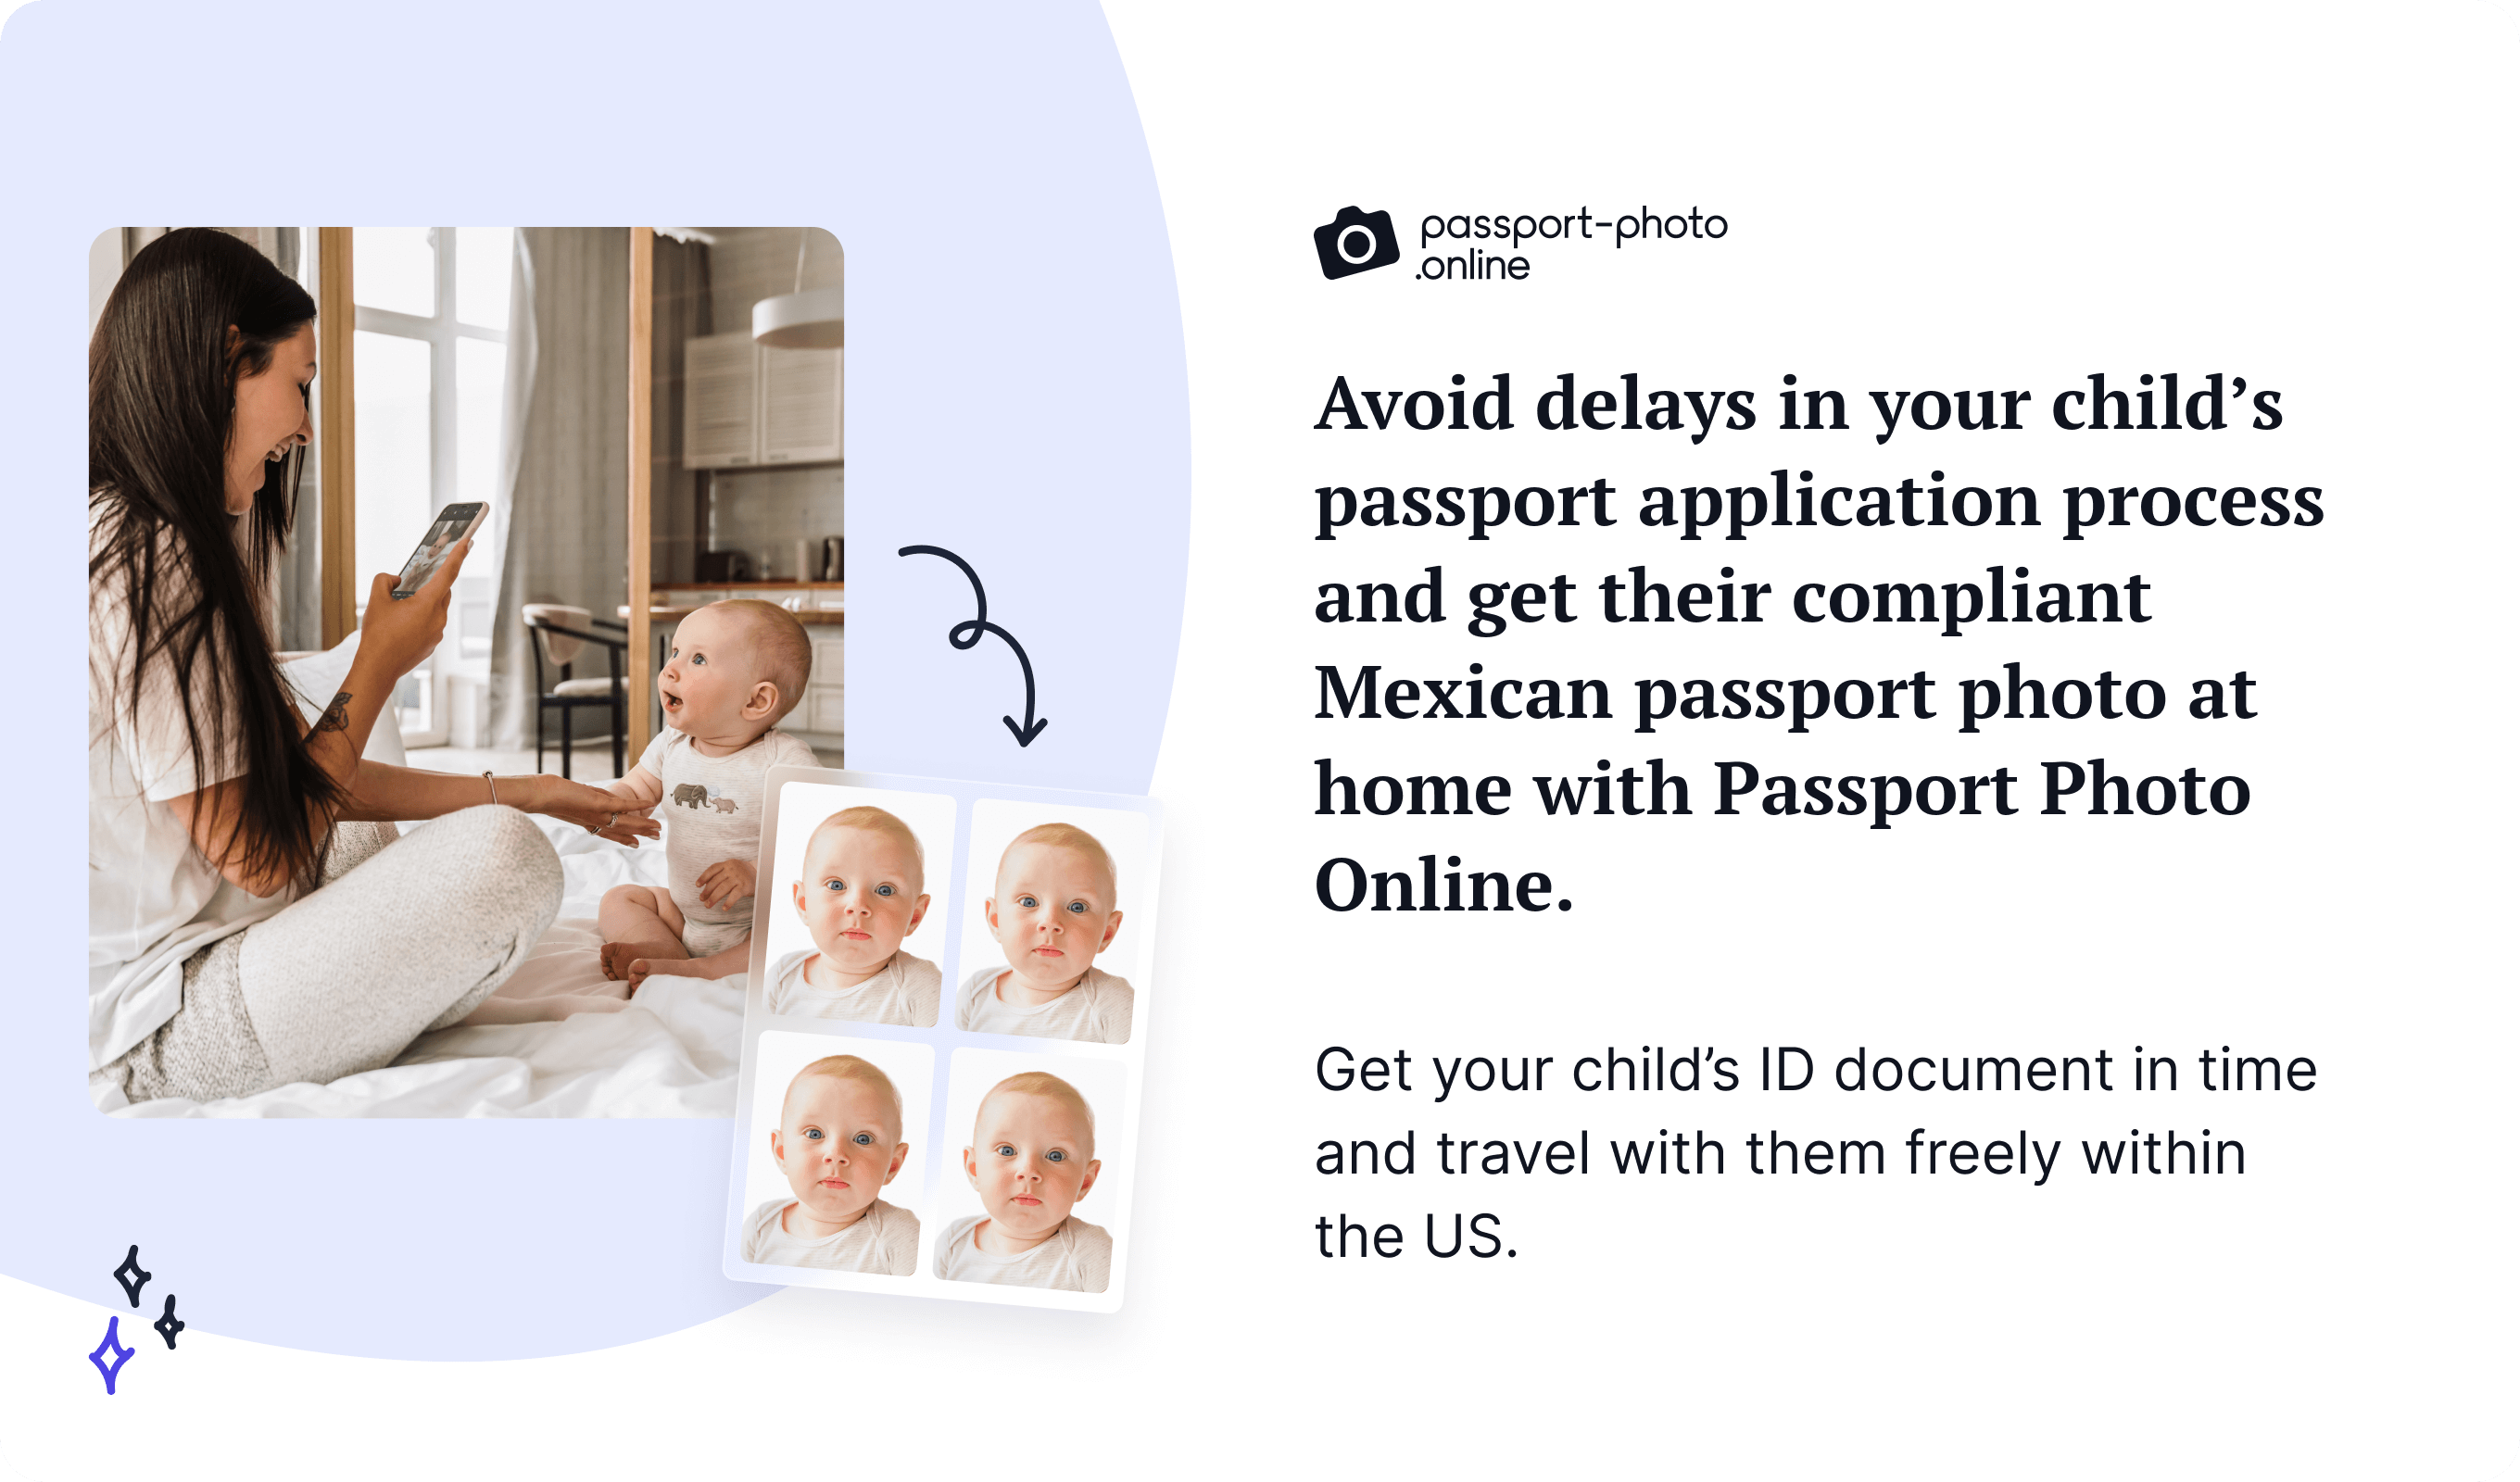 A child’s Mexican passport photo taken at home with a mobile photo booth.